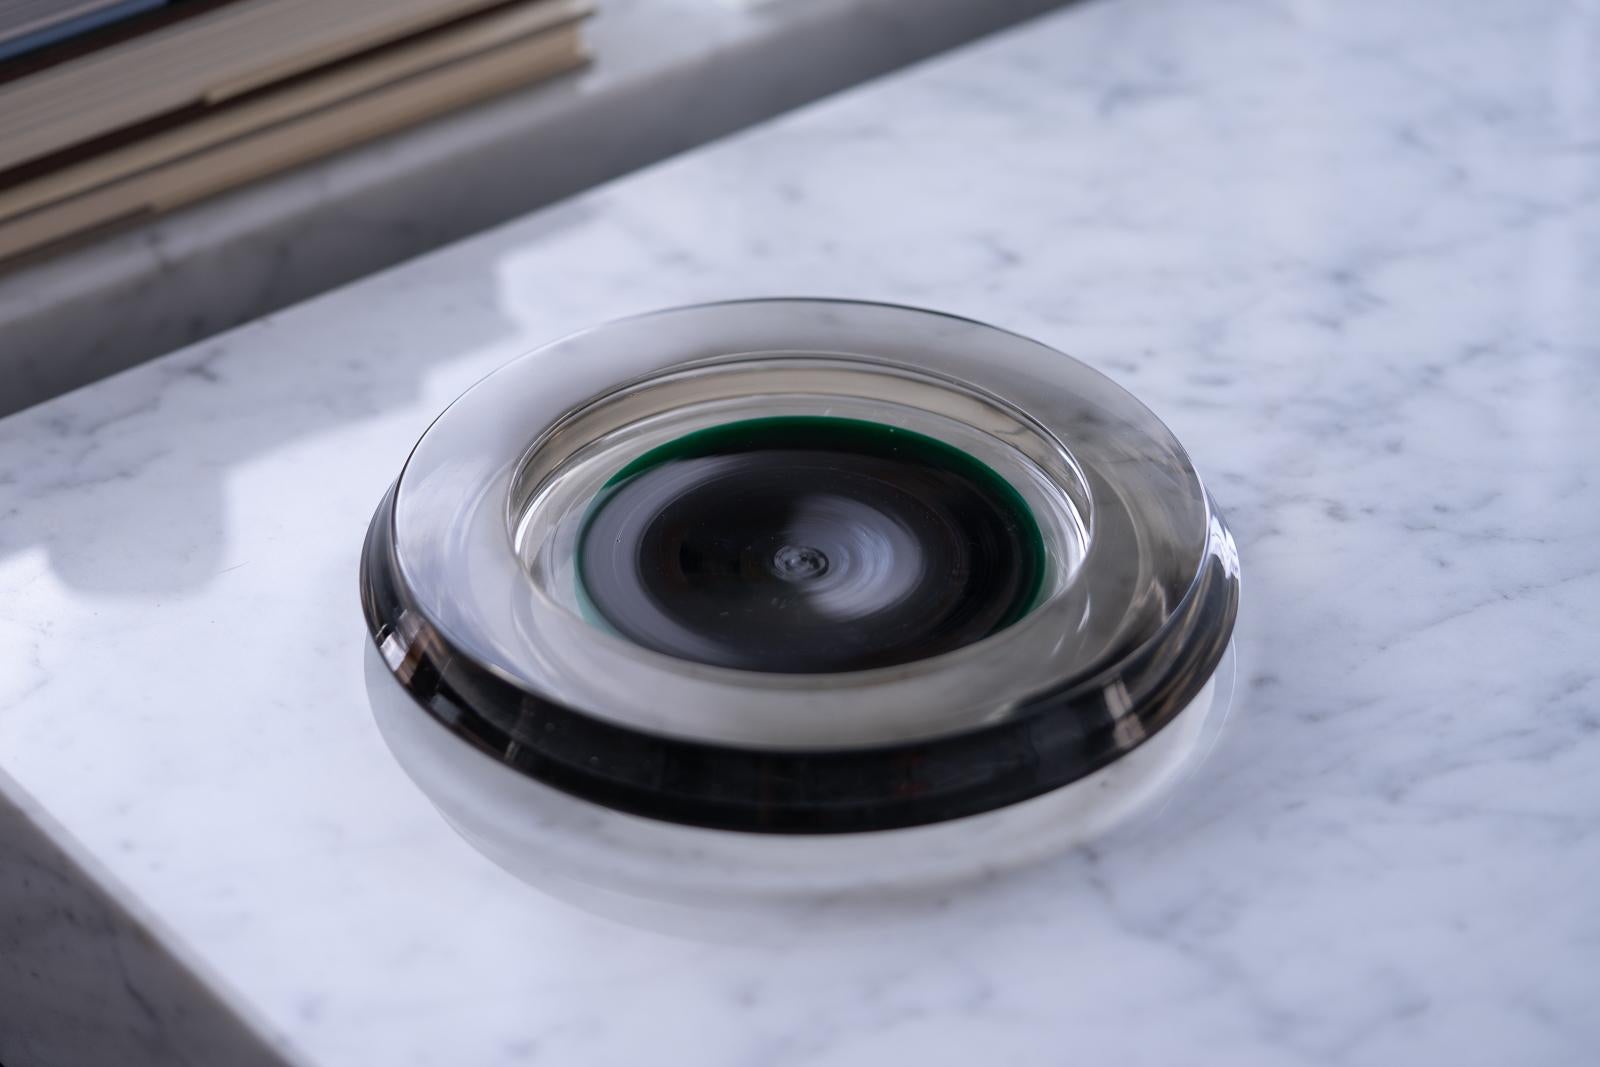 A large, beautiful, low blown glass dish designed by Sergio Asti for Salviati in 1964. The smoke grey body surrounds a deep green center at its core. Tapered sides make it appear to hover above the surface. Incised 